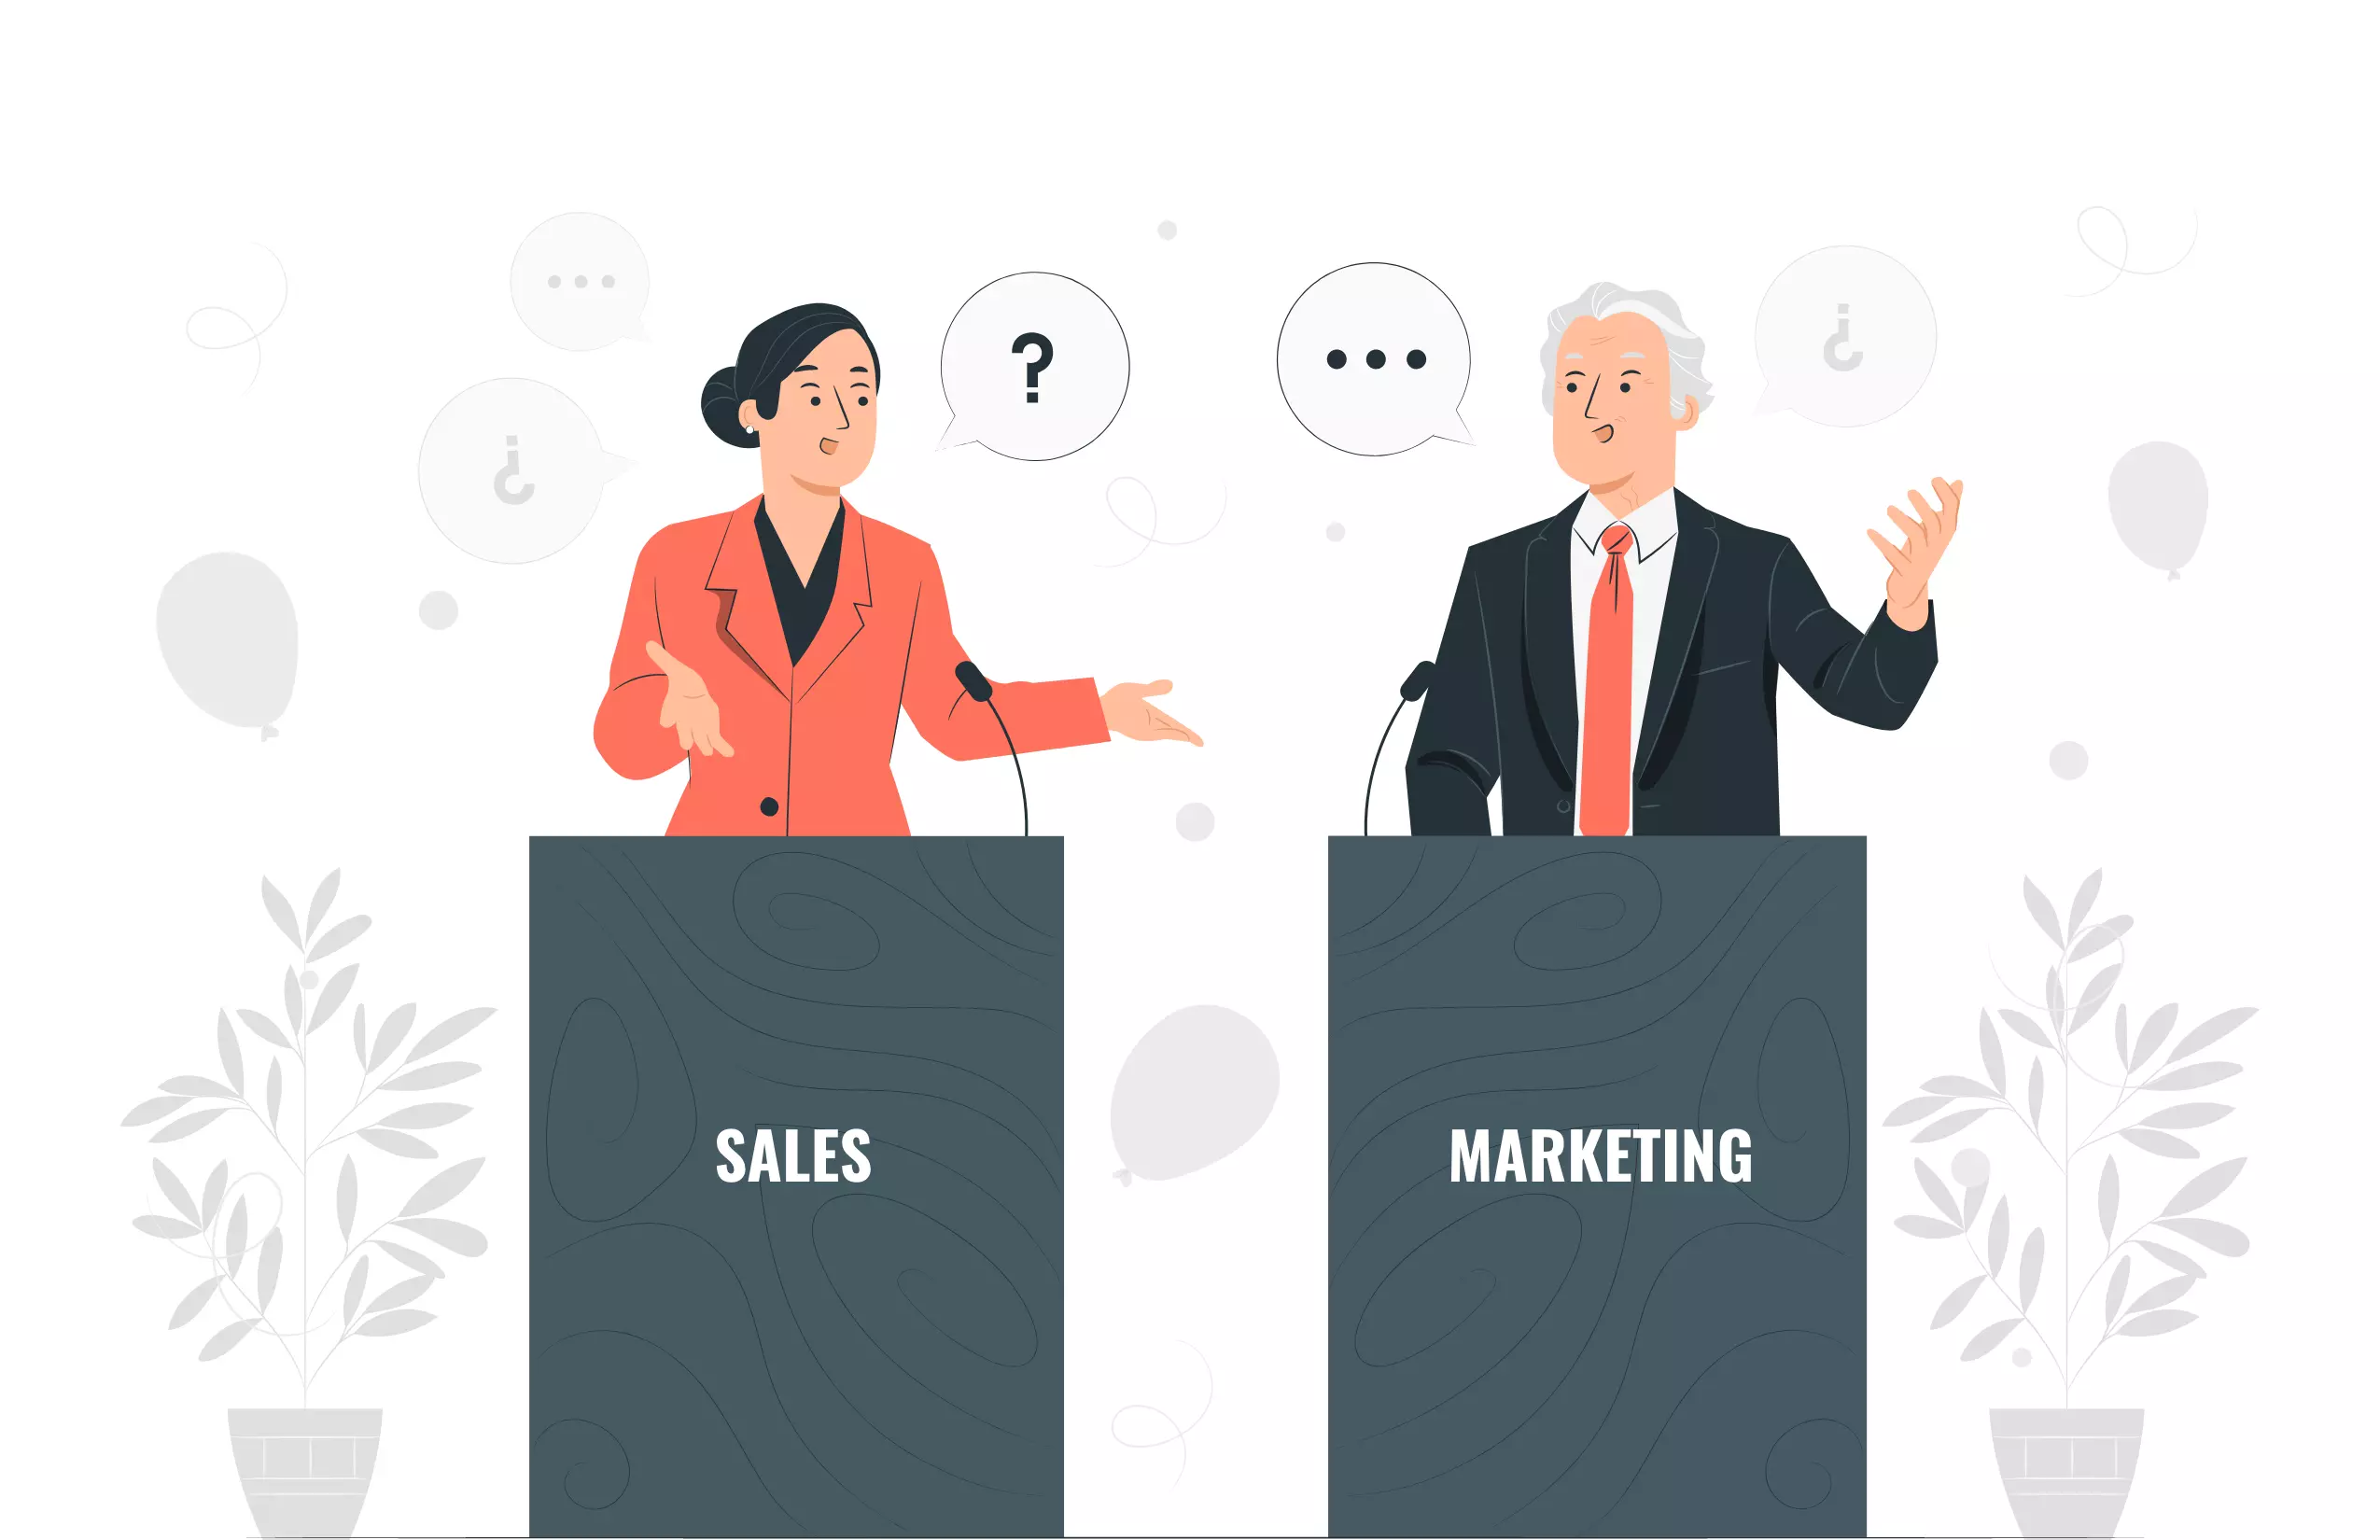 How to resolve the conflict between your Sales and Marketing Teams